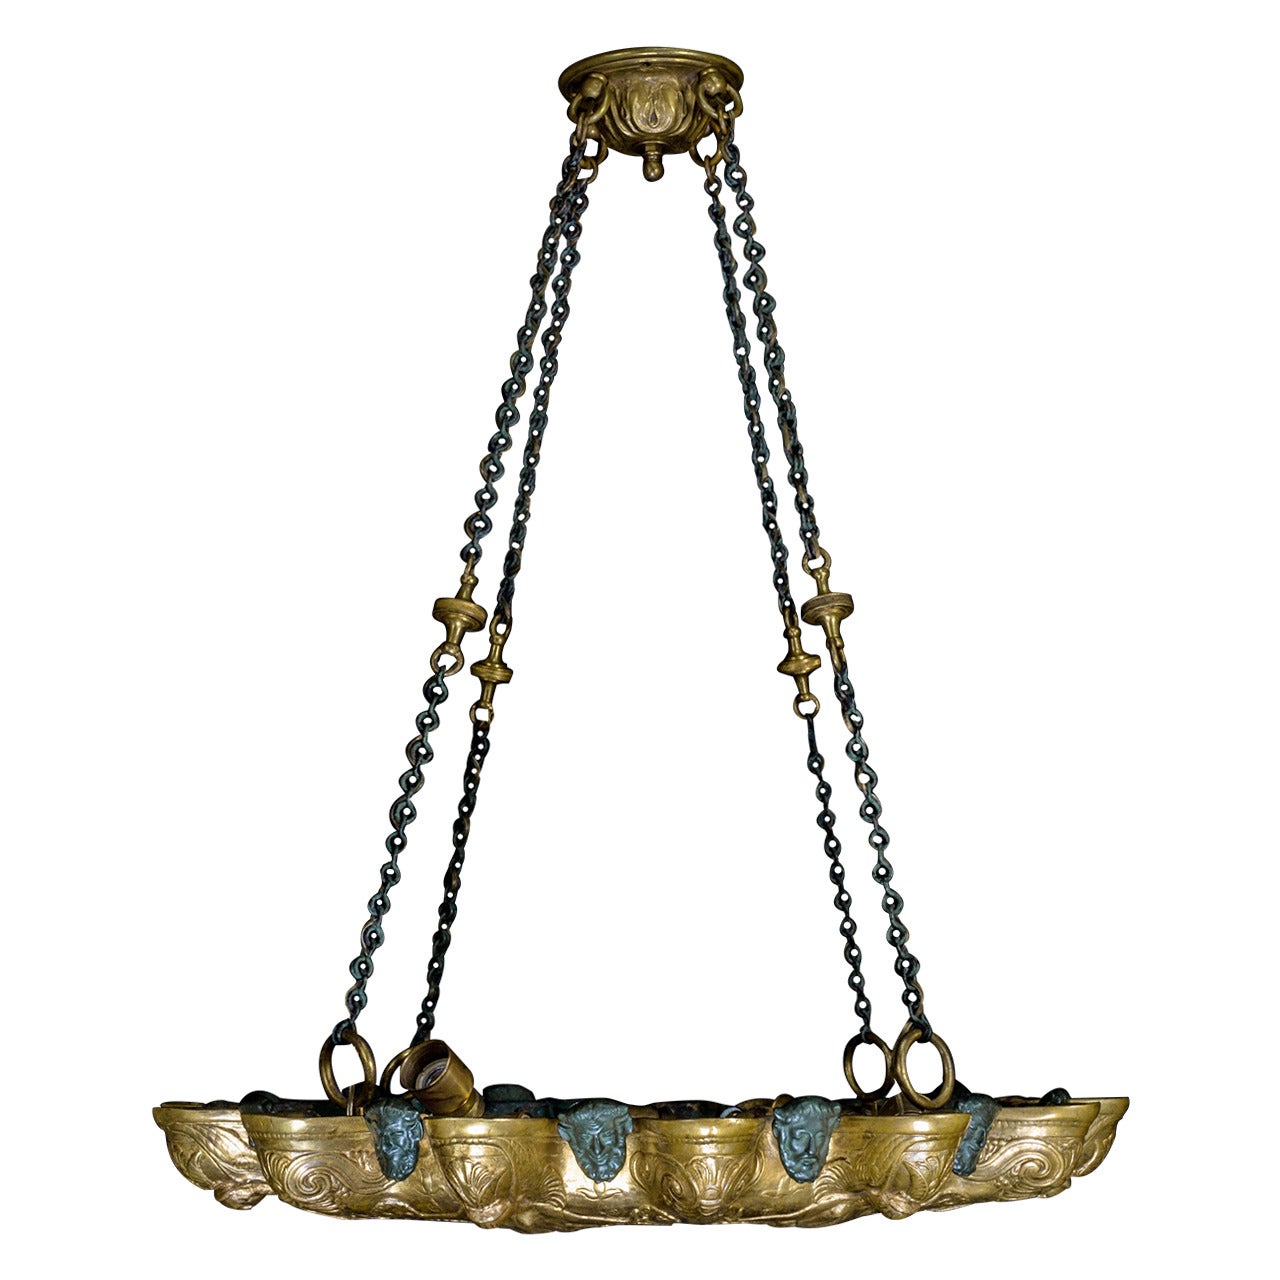 Unique Antique American Caldwell Neoclassical Gilt and Patina Bronze Chandelier For Sale